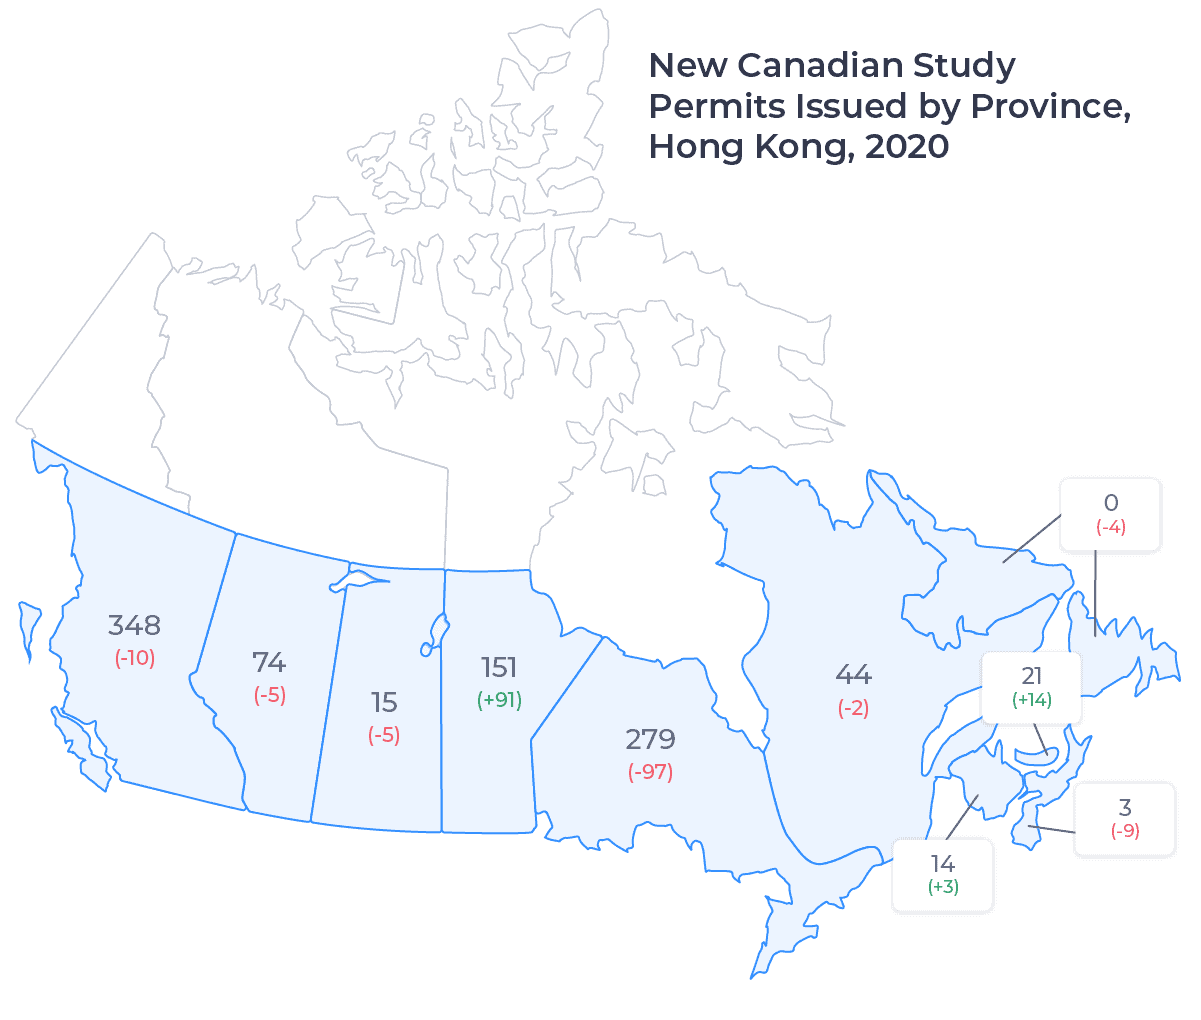 Map showing the distribution of new Canadian study permits issued to Hong Kong residents by province of study in 2020. Examined in detail below.